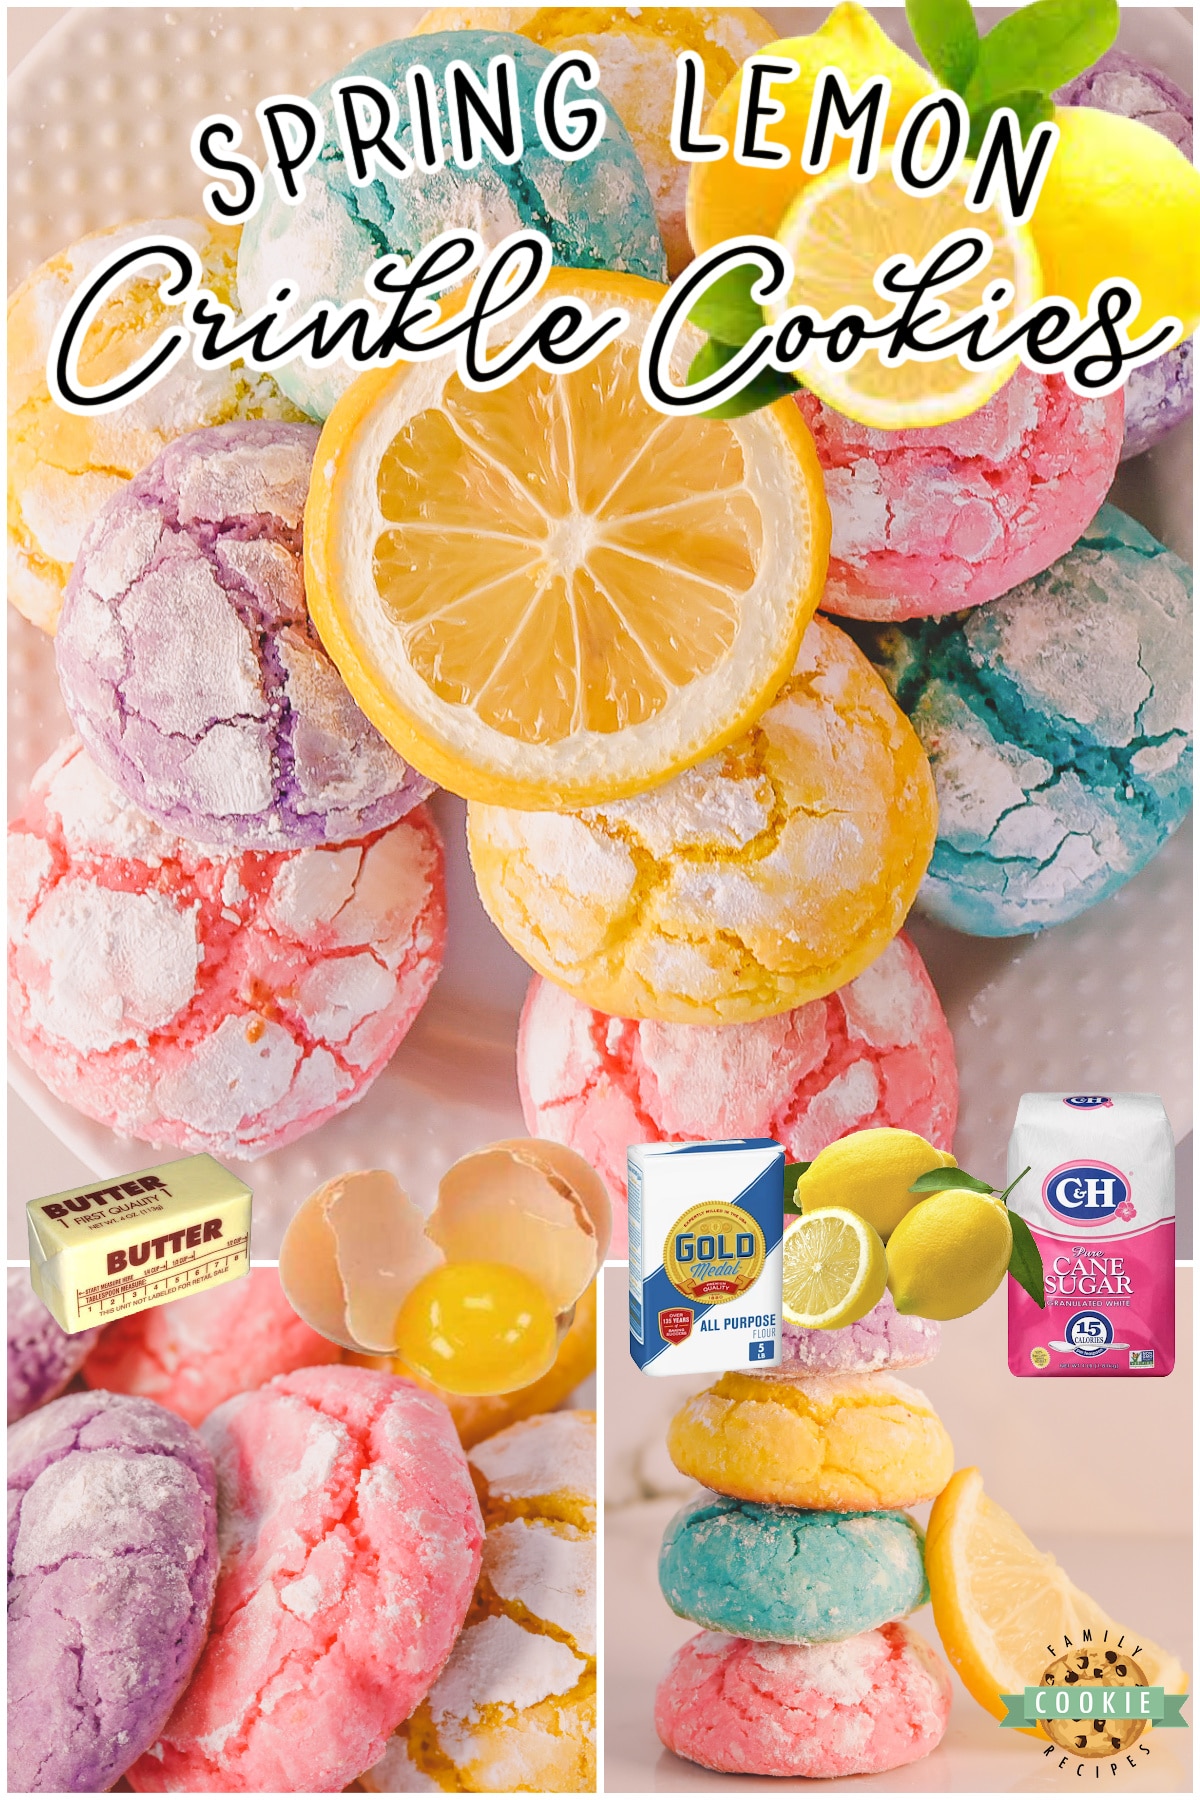 Spring Lemon Crinkle Cookies with amazing lemon flavor & vibrant, festive colors!  Homemade Lemon crinkle cookies are perfect for Easter!